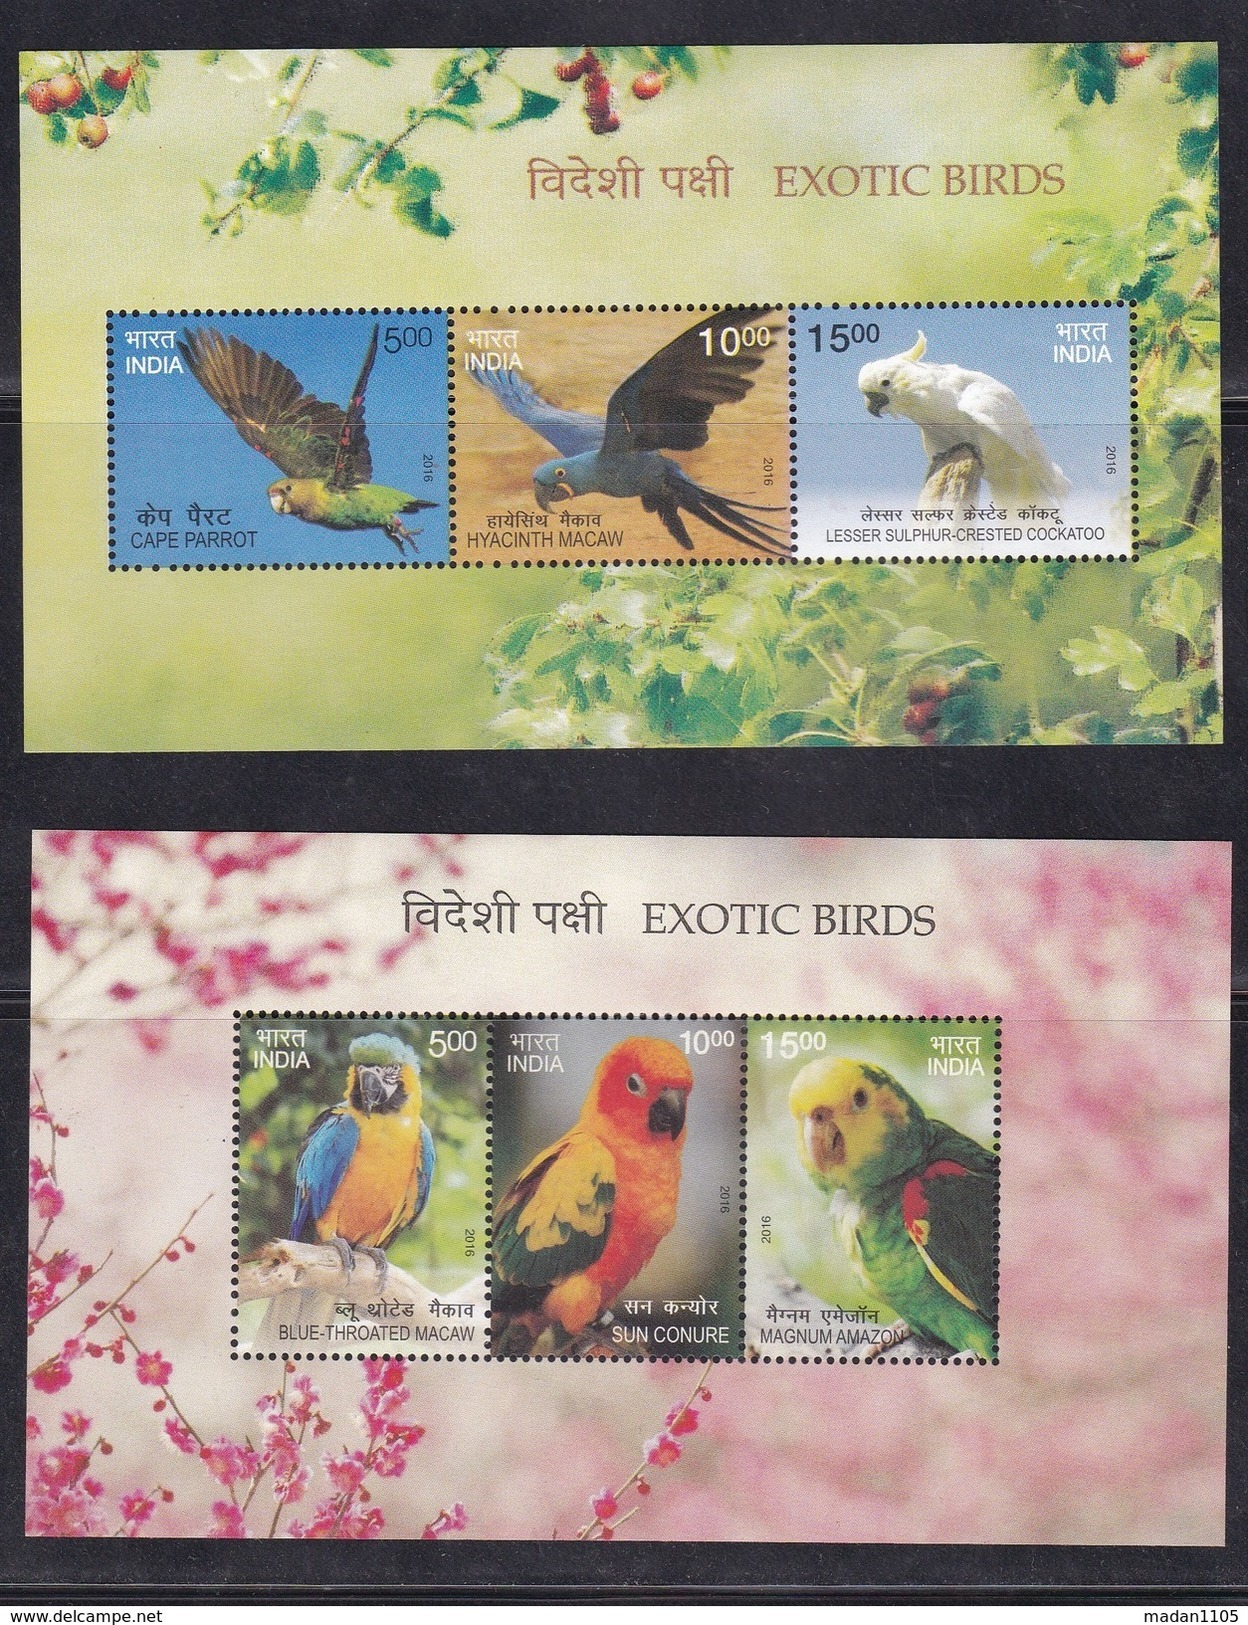 INDIA, 2016, Exotic Birds,  Macaw, Conure, Parrot, Amzon, Crested Cockatoo,  MS, 2 SHEETS, MNH, (**) - Unused Stamps